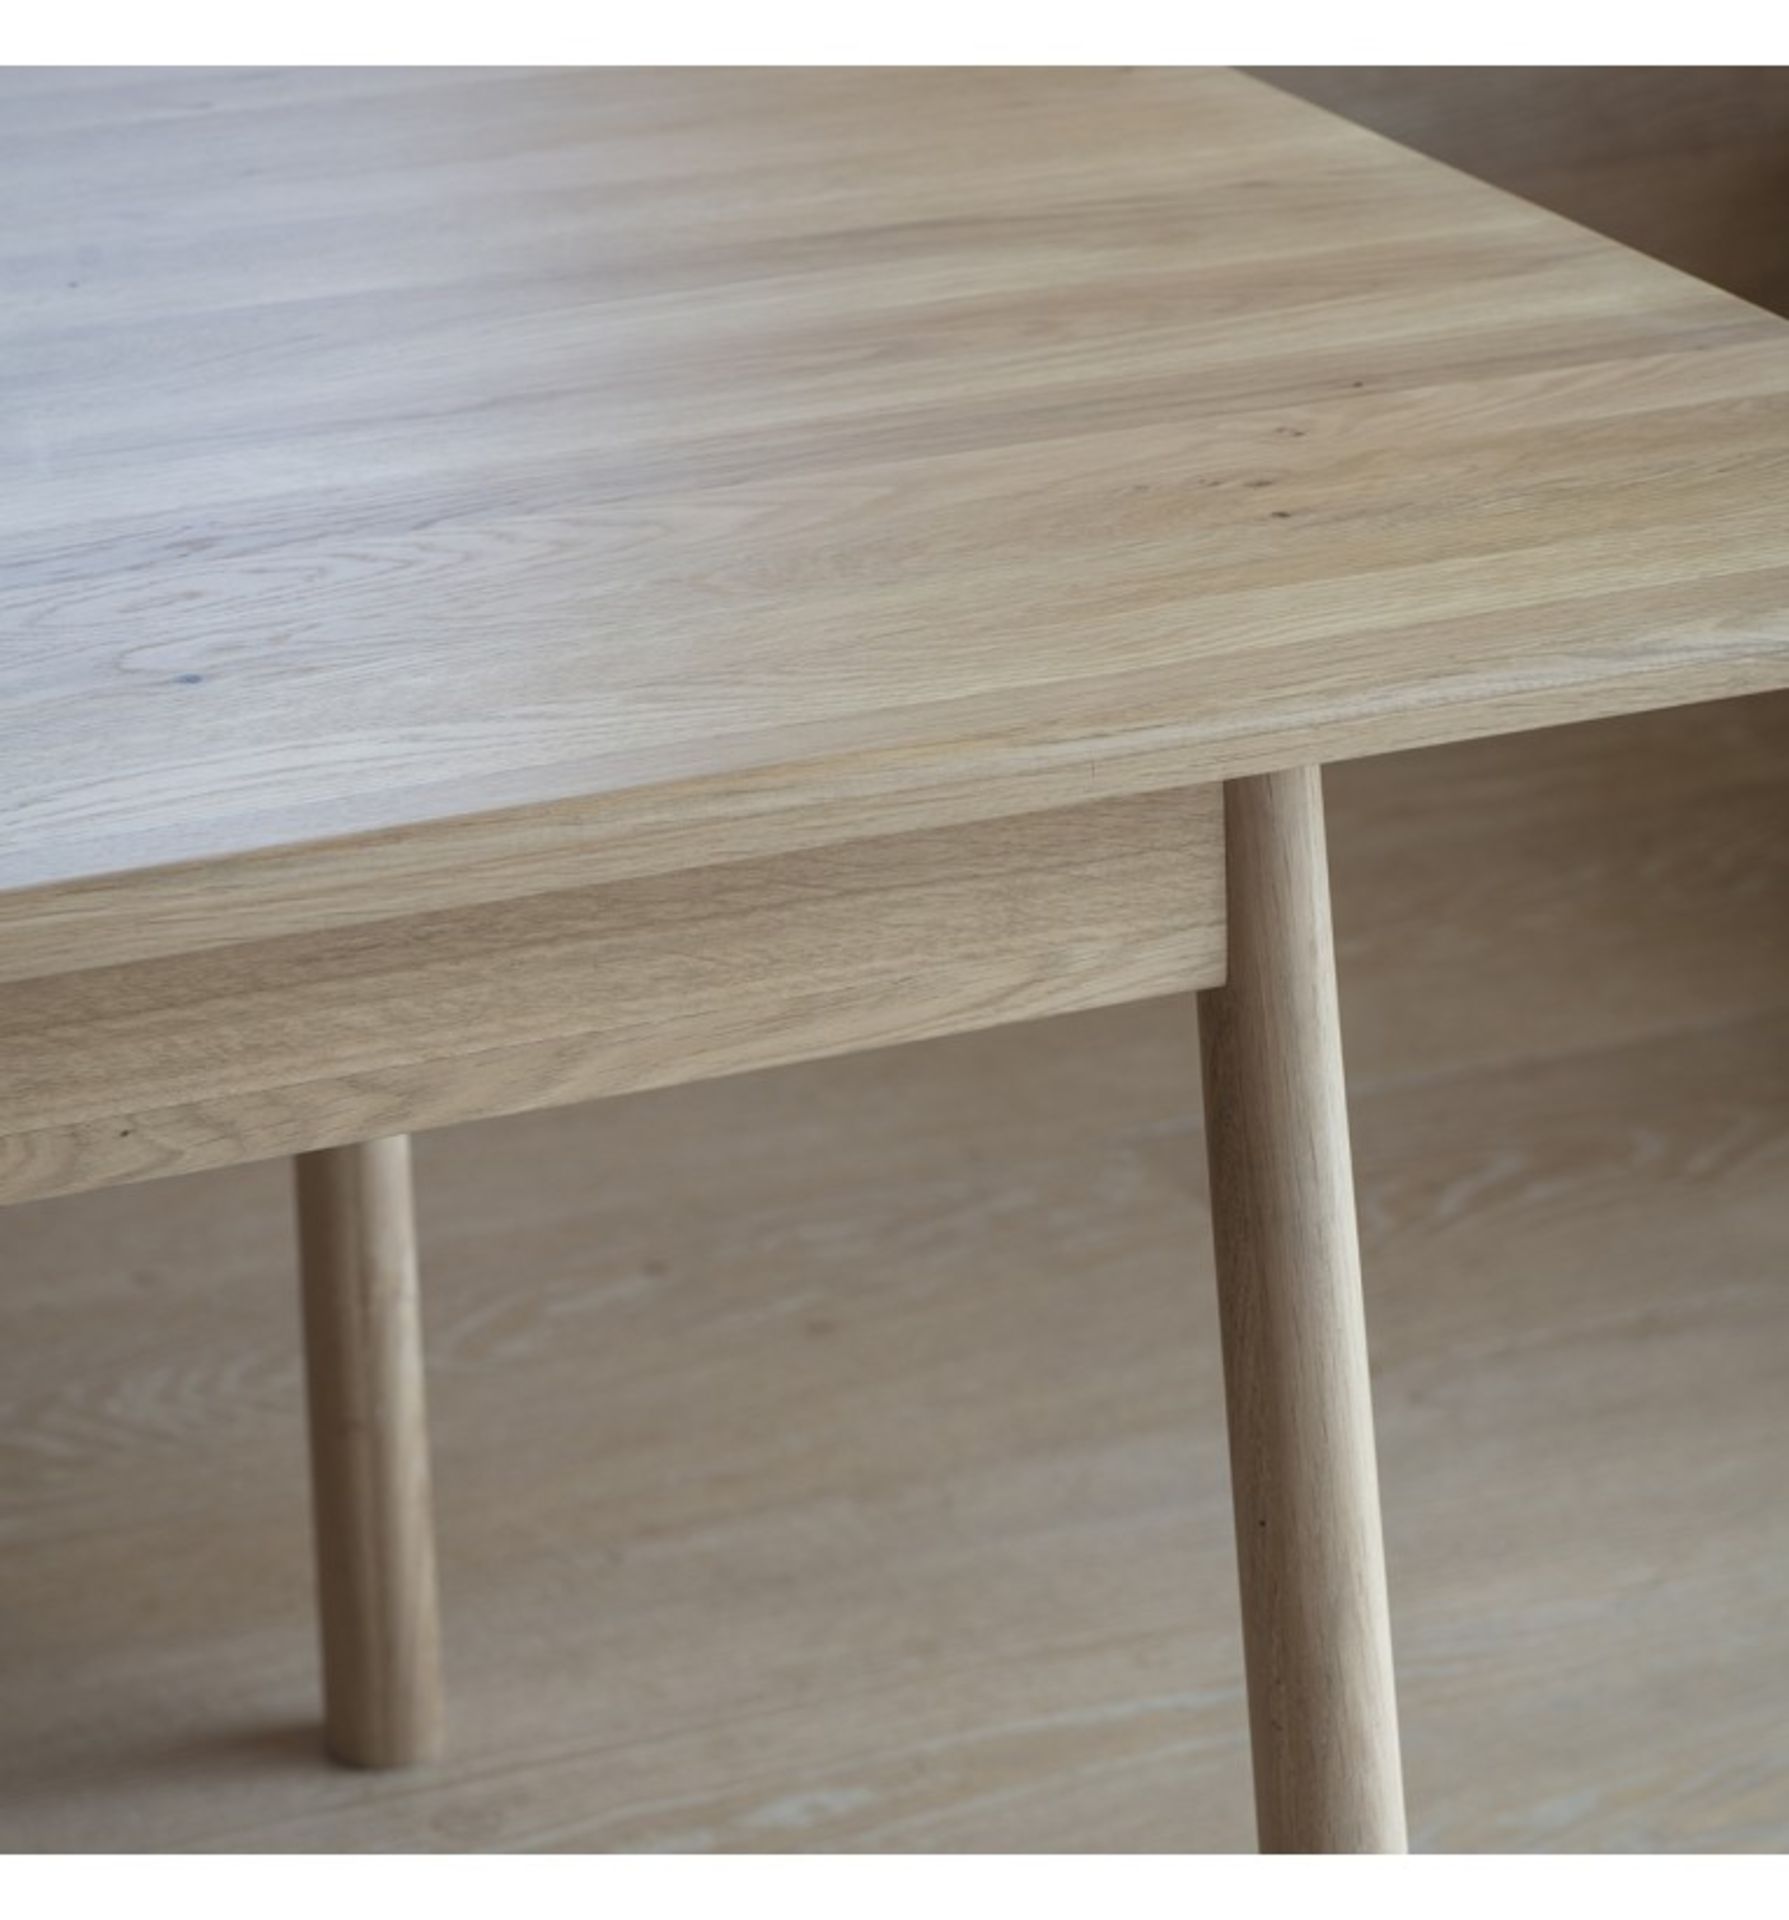 Scandinavian Style Extending Dining Table - Image 3 of 5